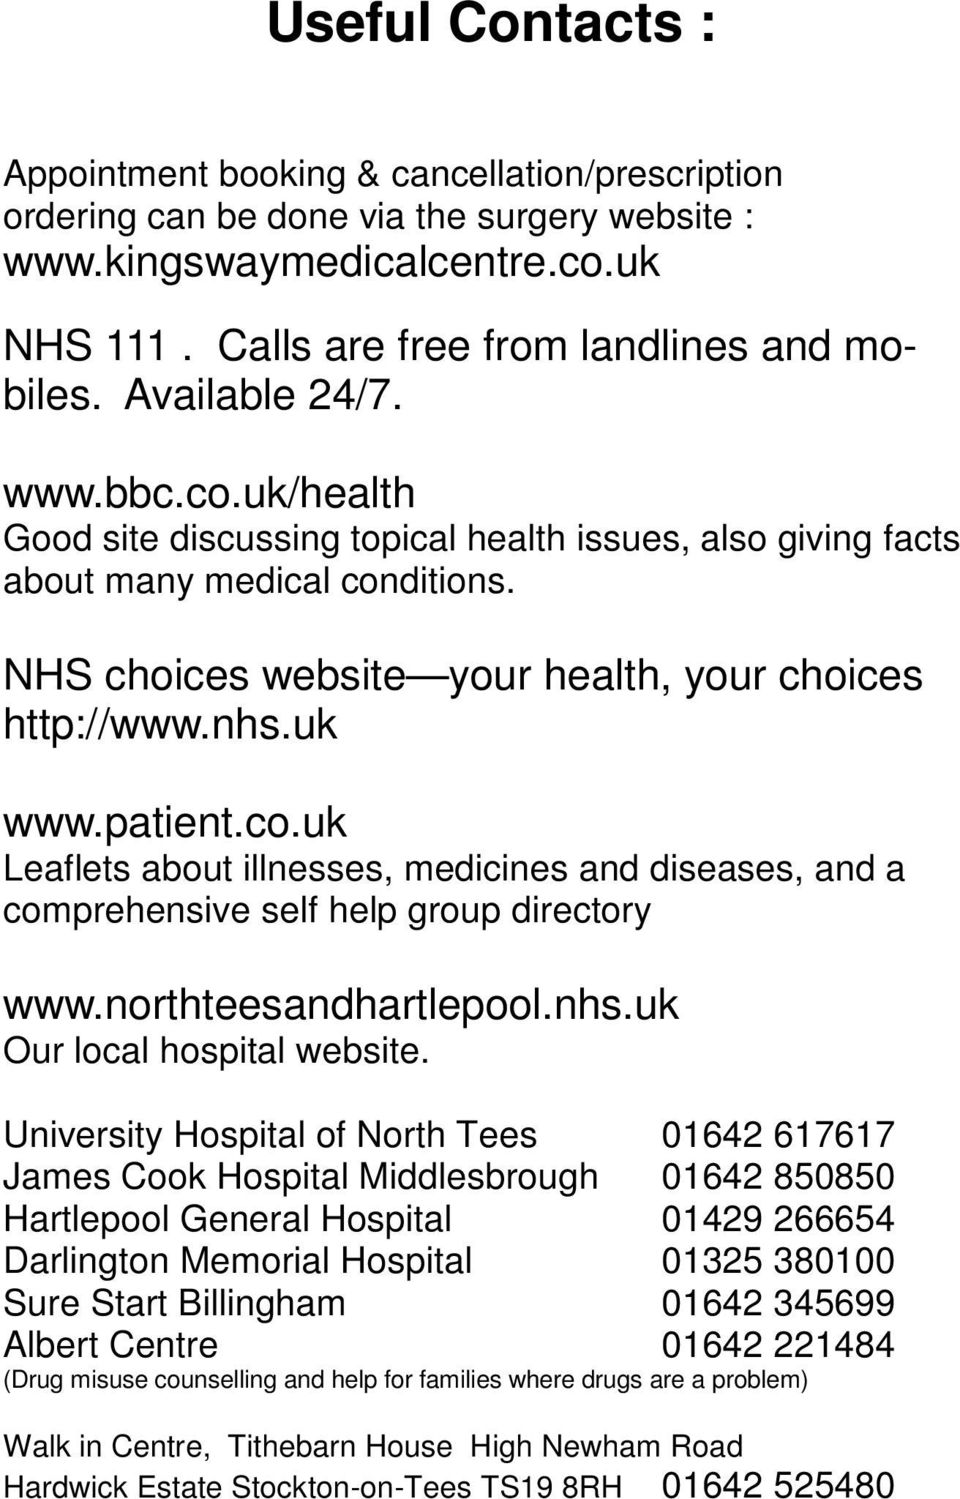 patient.co.uk Leaflets about illnesses, medicines and diseases, and a comprehensive self help group directory www.northteesandhartlepool.nhs.uk Our local hospital website.